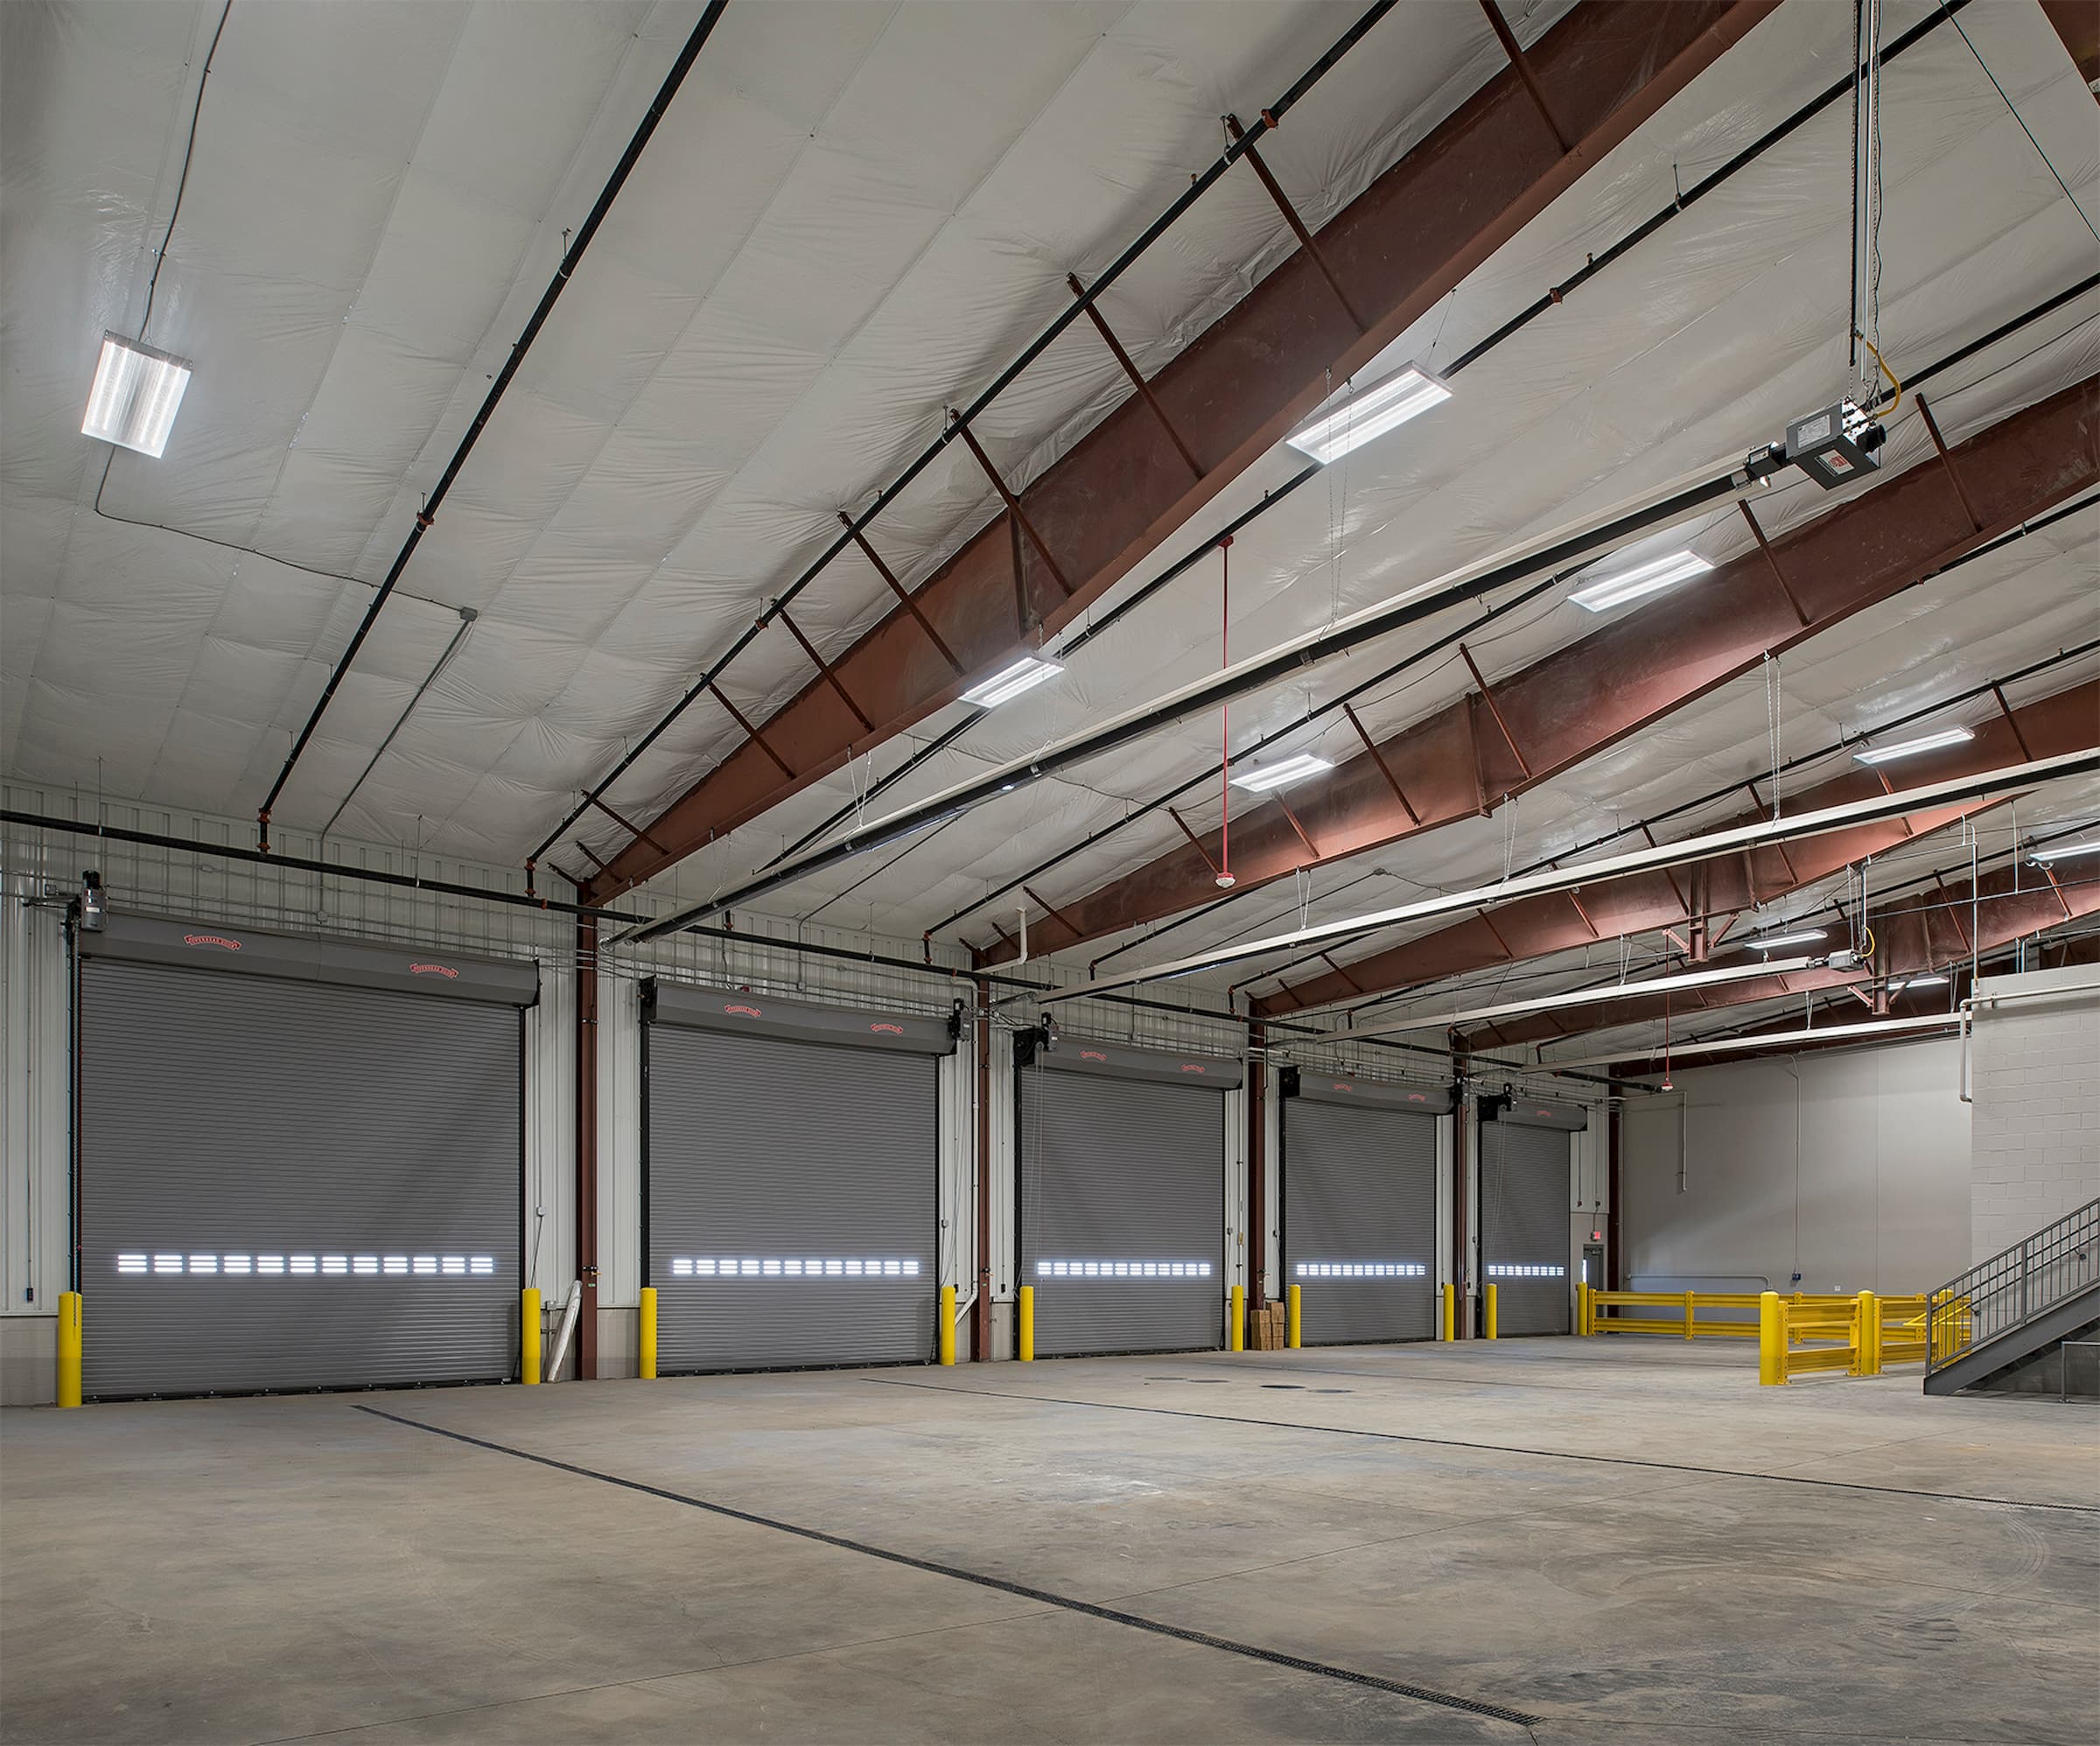 A picture of an empty industrial garage